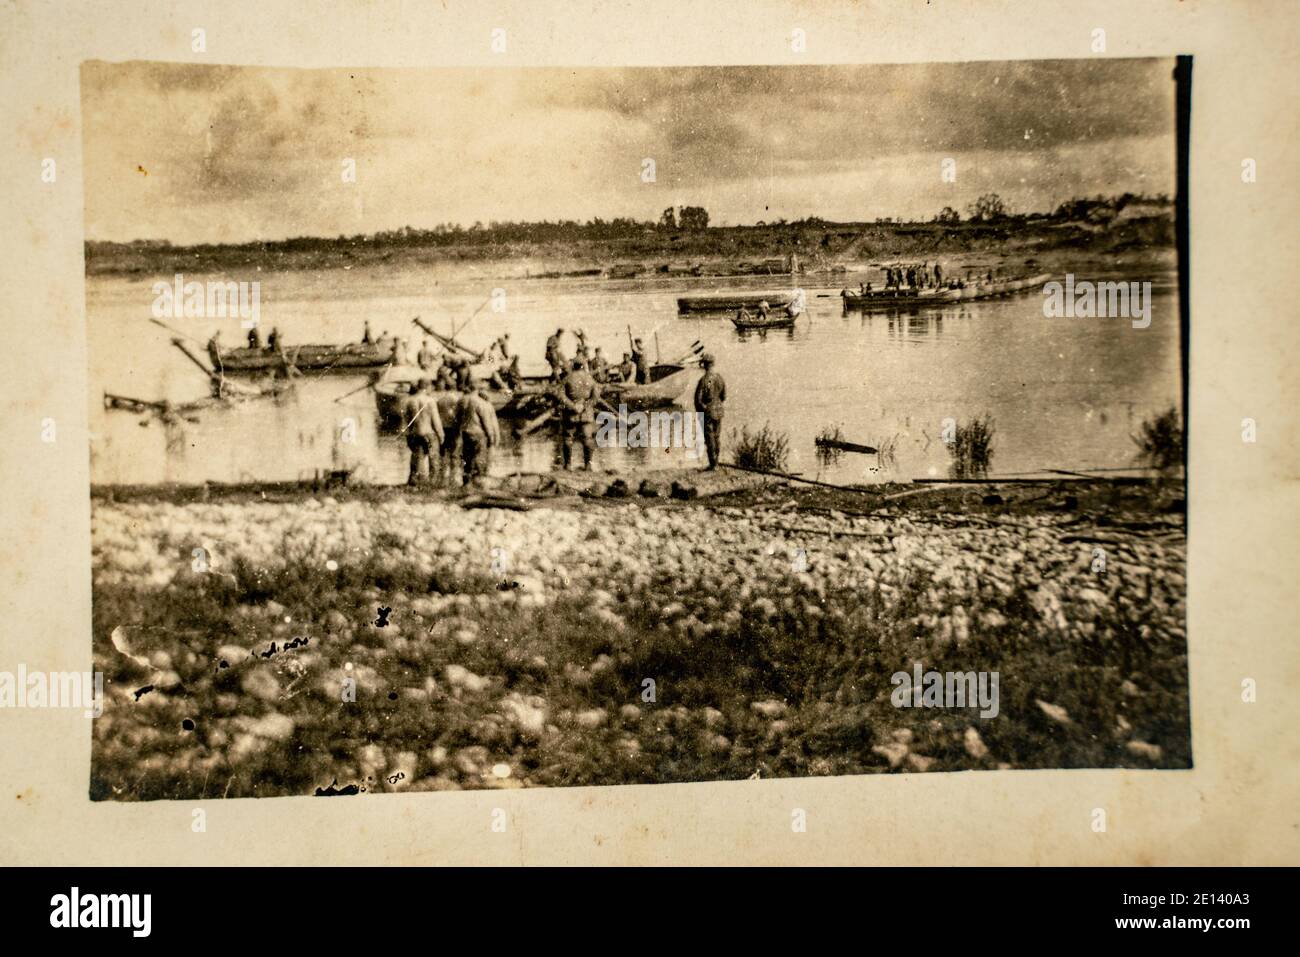 Latvia - CIRCA 1918: Latvian army troops crossing the river at World War I. Archive vintage black and white battlefield photography Stock Photo